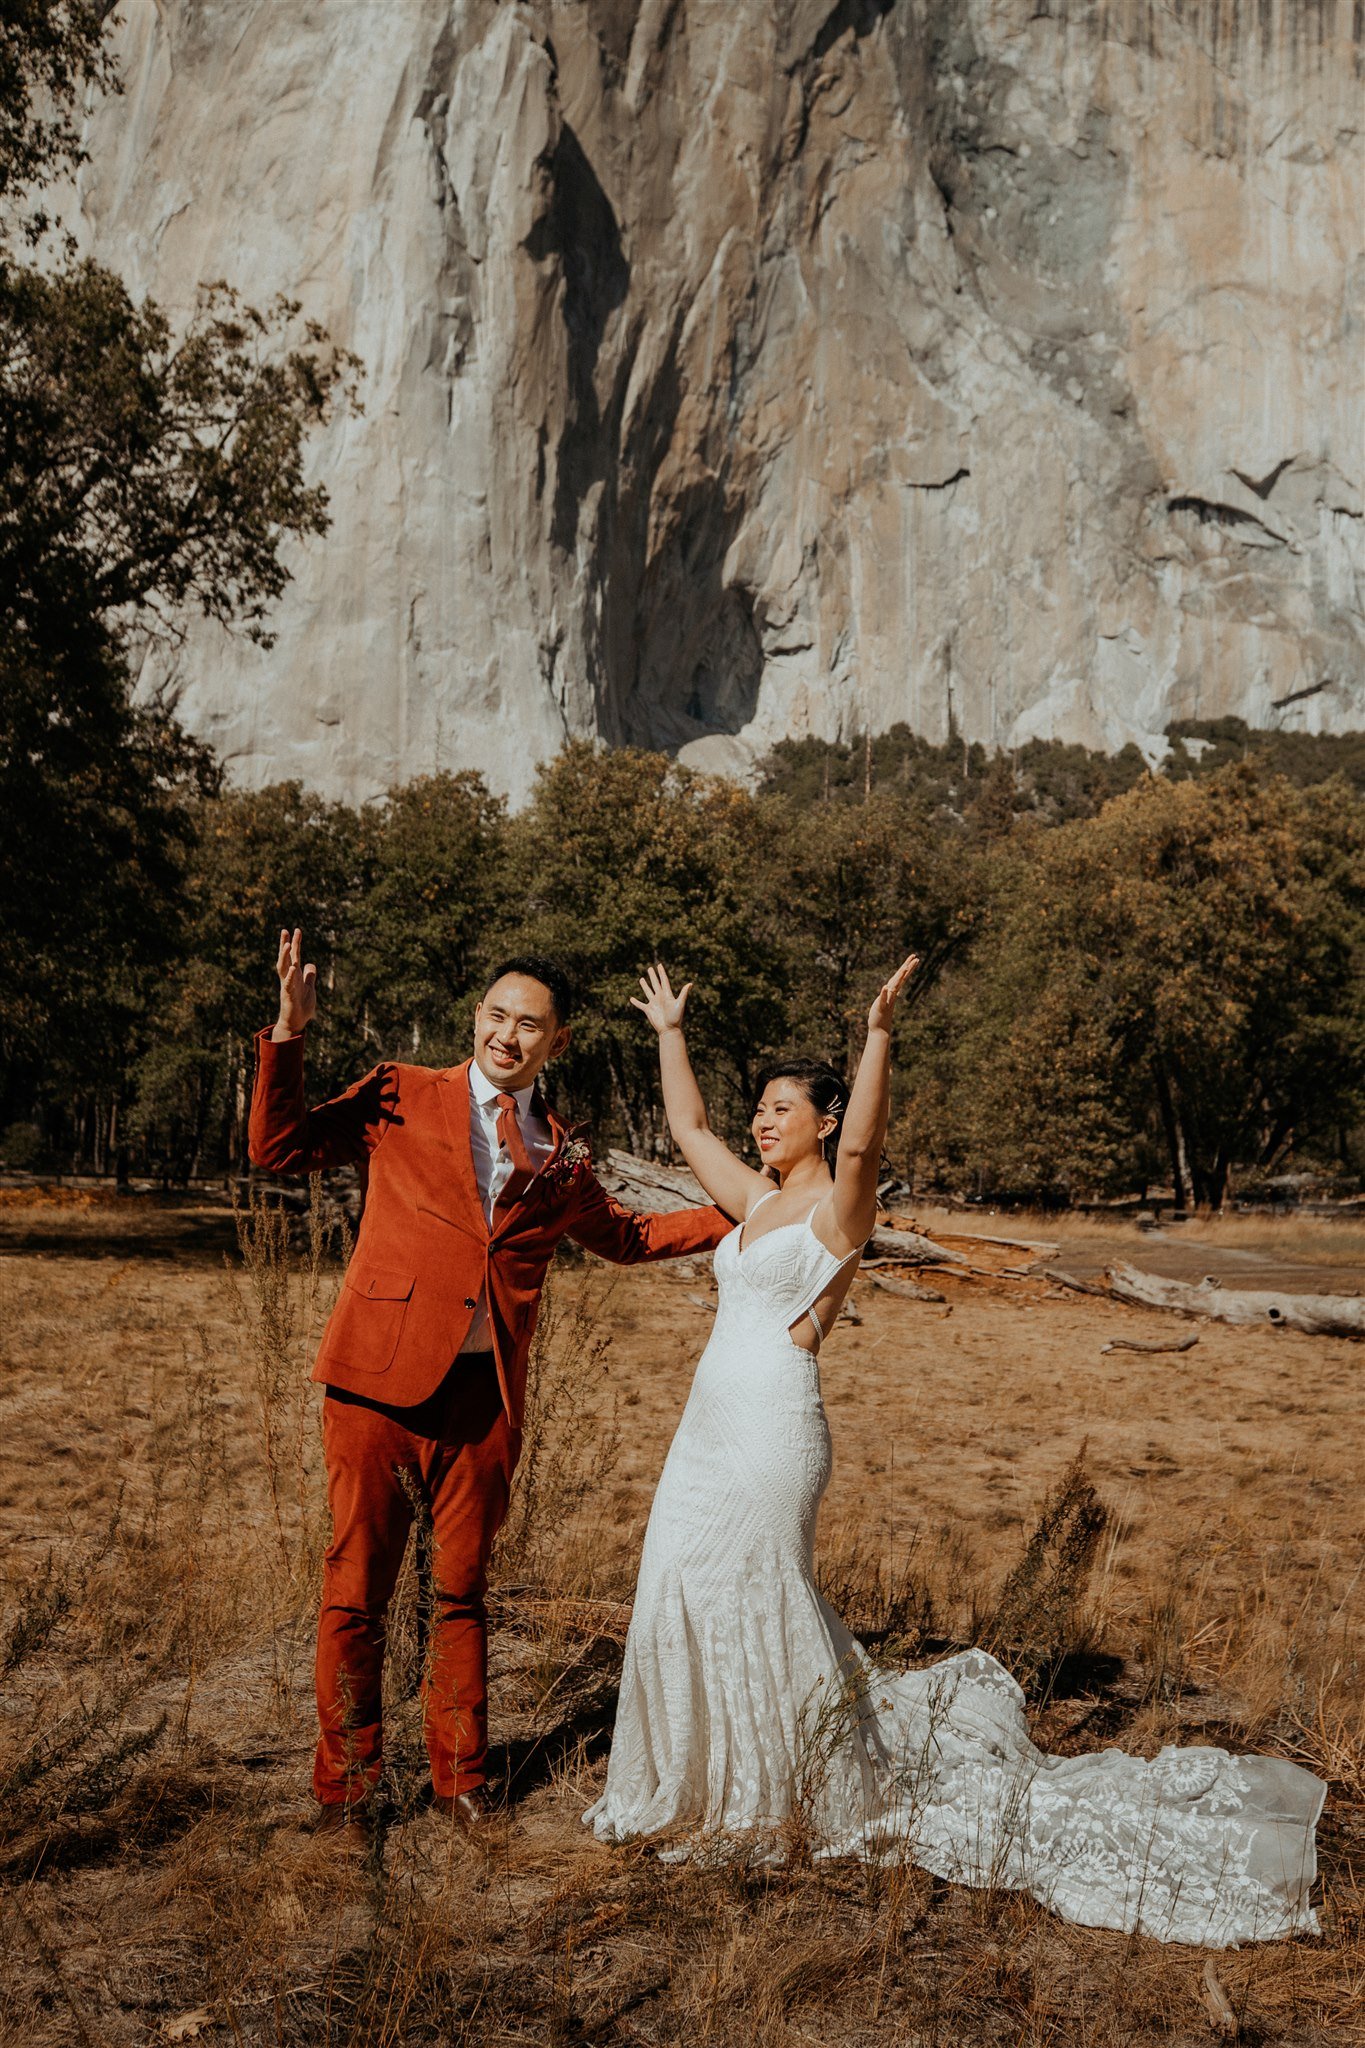 Bride and groom cheering after wedding ceremony at Yosemite National Park